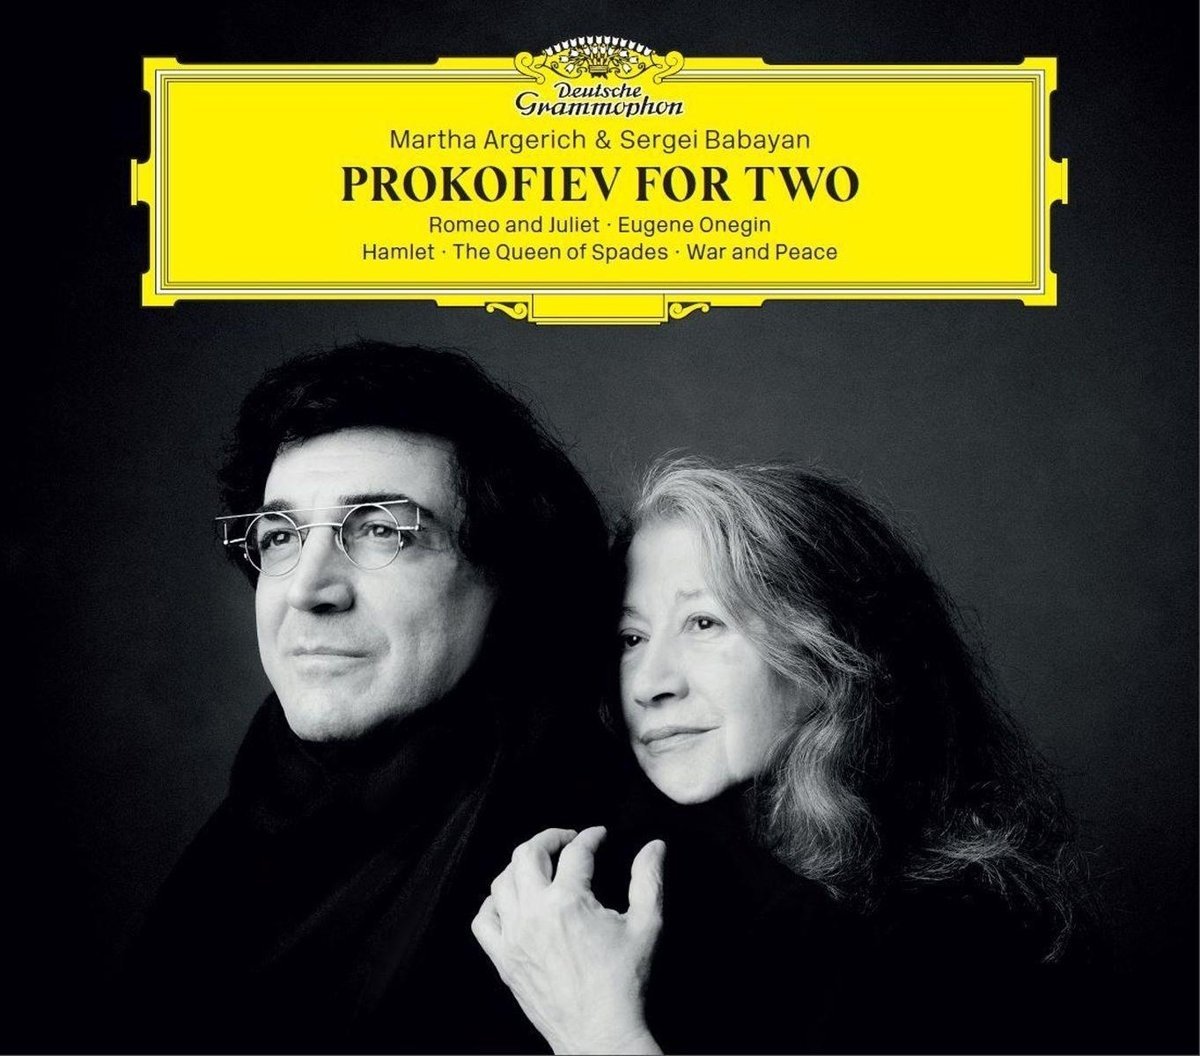 Prokofiev for Two